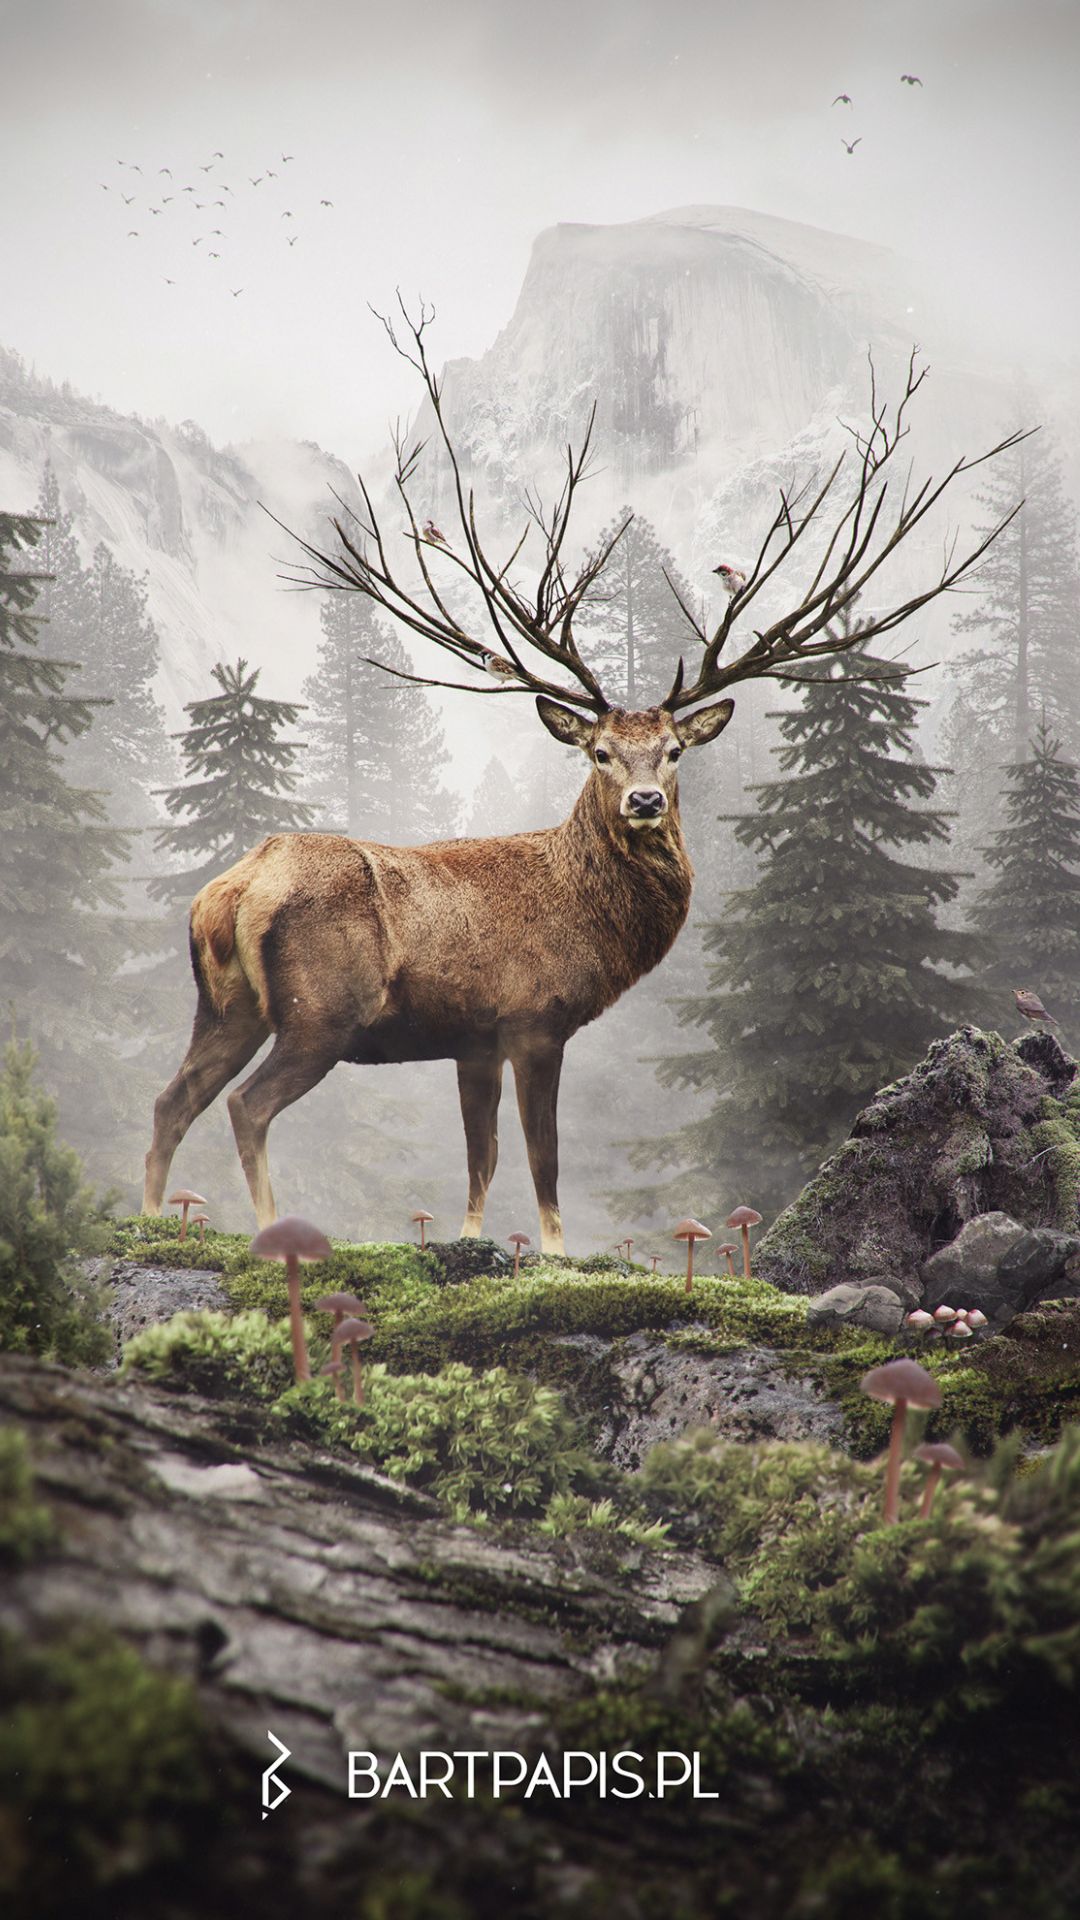 A deer with antlers in the forest - Deer